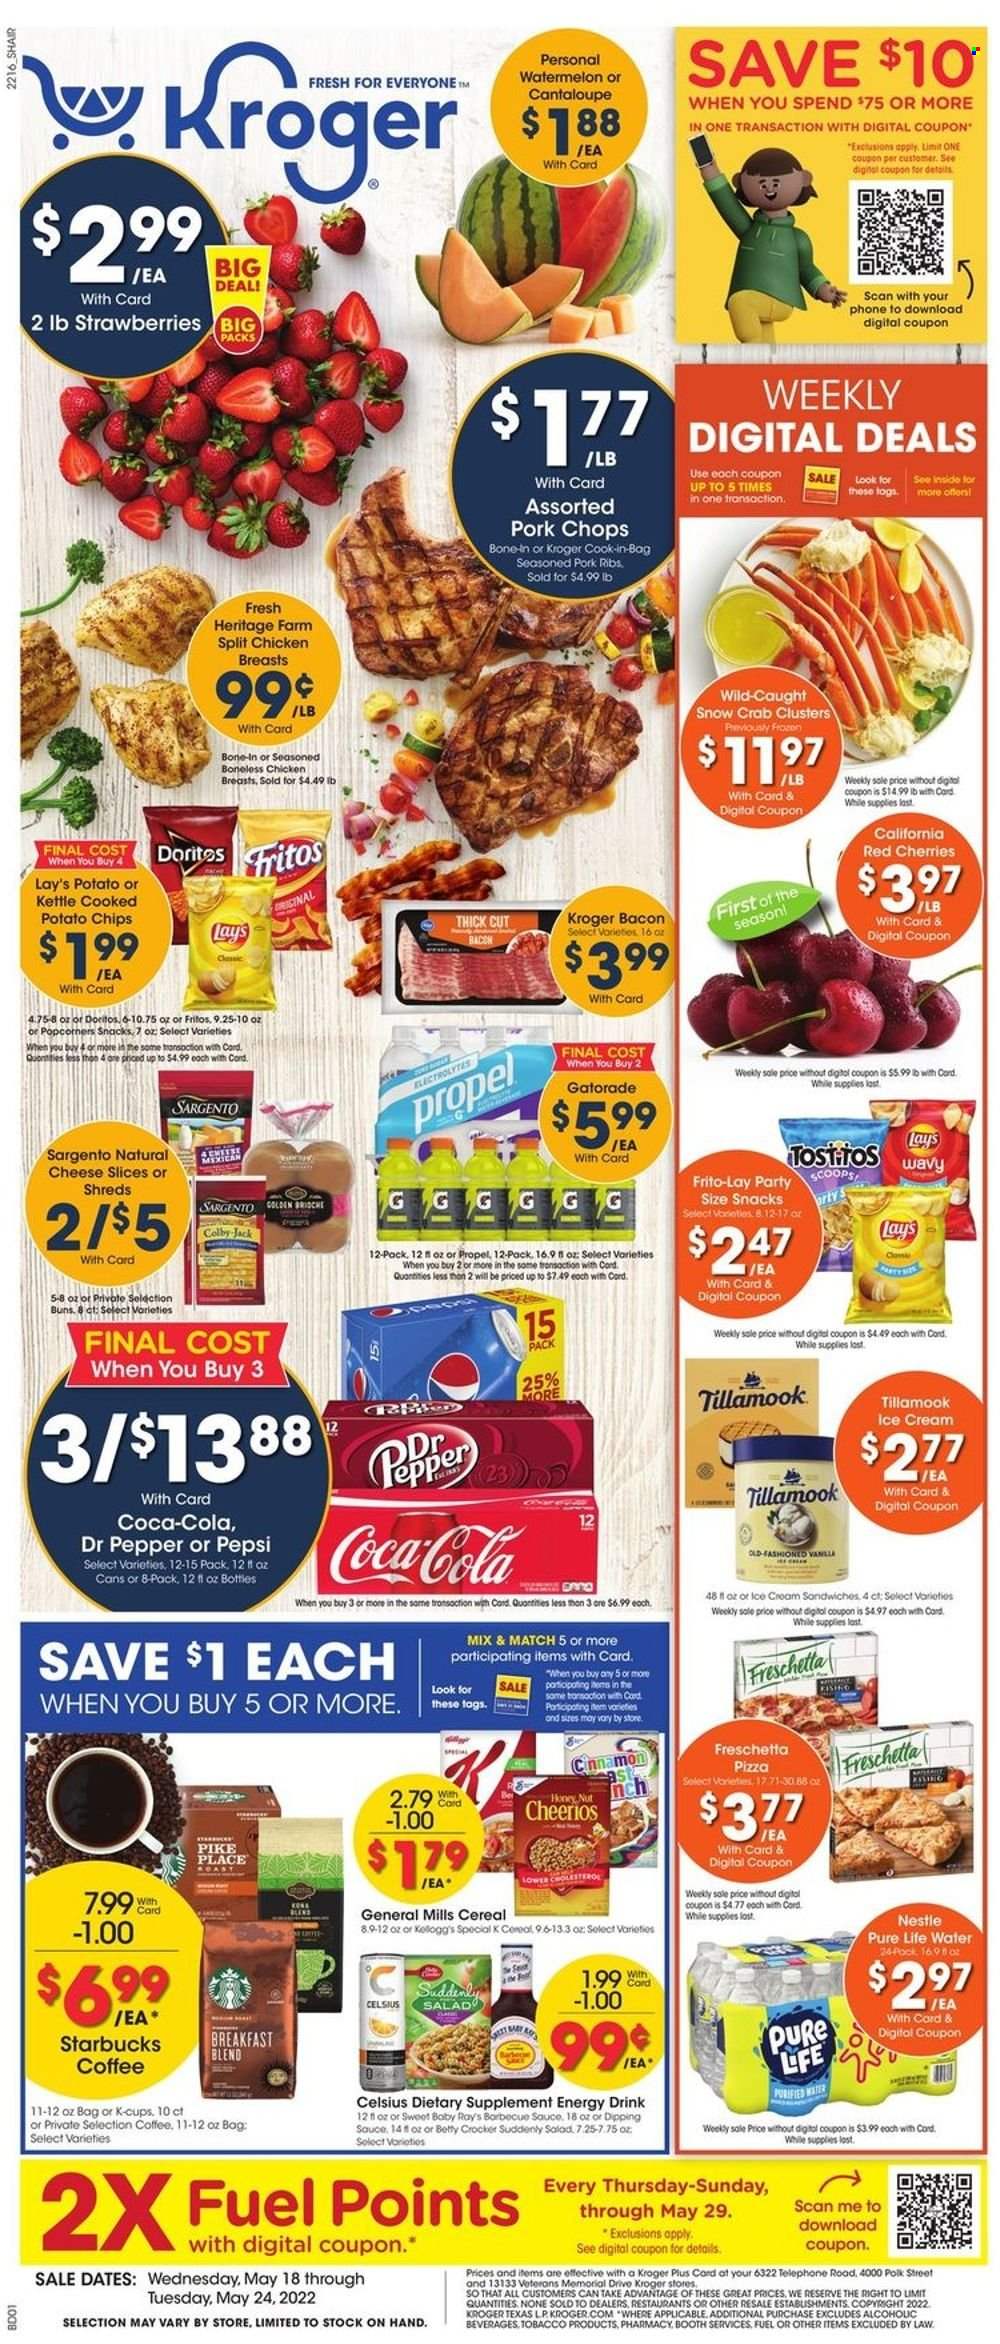 thumbnail - Kroger Flyer - 05/18/2022 - 05/24/2022 - Sales products - buns, watermelon, cherries, crab, pizza, bacon, Colby cheese, sliced cheese, Sargento, ice cream, Nestlé, snack, Doritos, Fritos, potato chips, chips, Lay’s, popcorn, Frito-Lay, cereals, Cheerios, cinnamon, Coca-Cola, Pepsi, energy drink, Dr. Pepper, Gatorade, Pure Life Water, coffee, Starbucks, coffee capsules, K-Cups, breakfast blend, chicken breasts, pork chops, pork meat, pork ribs, dietary supplement. Page 1.